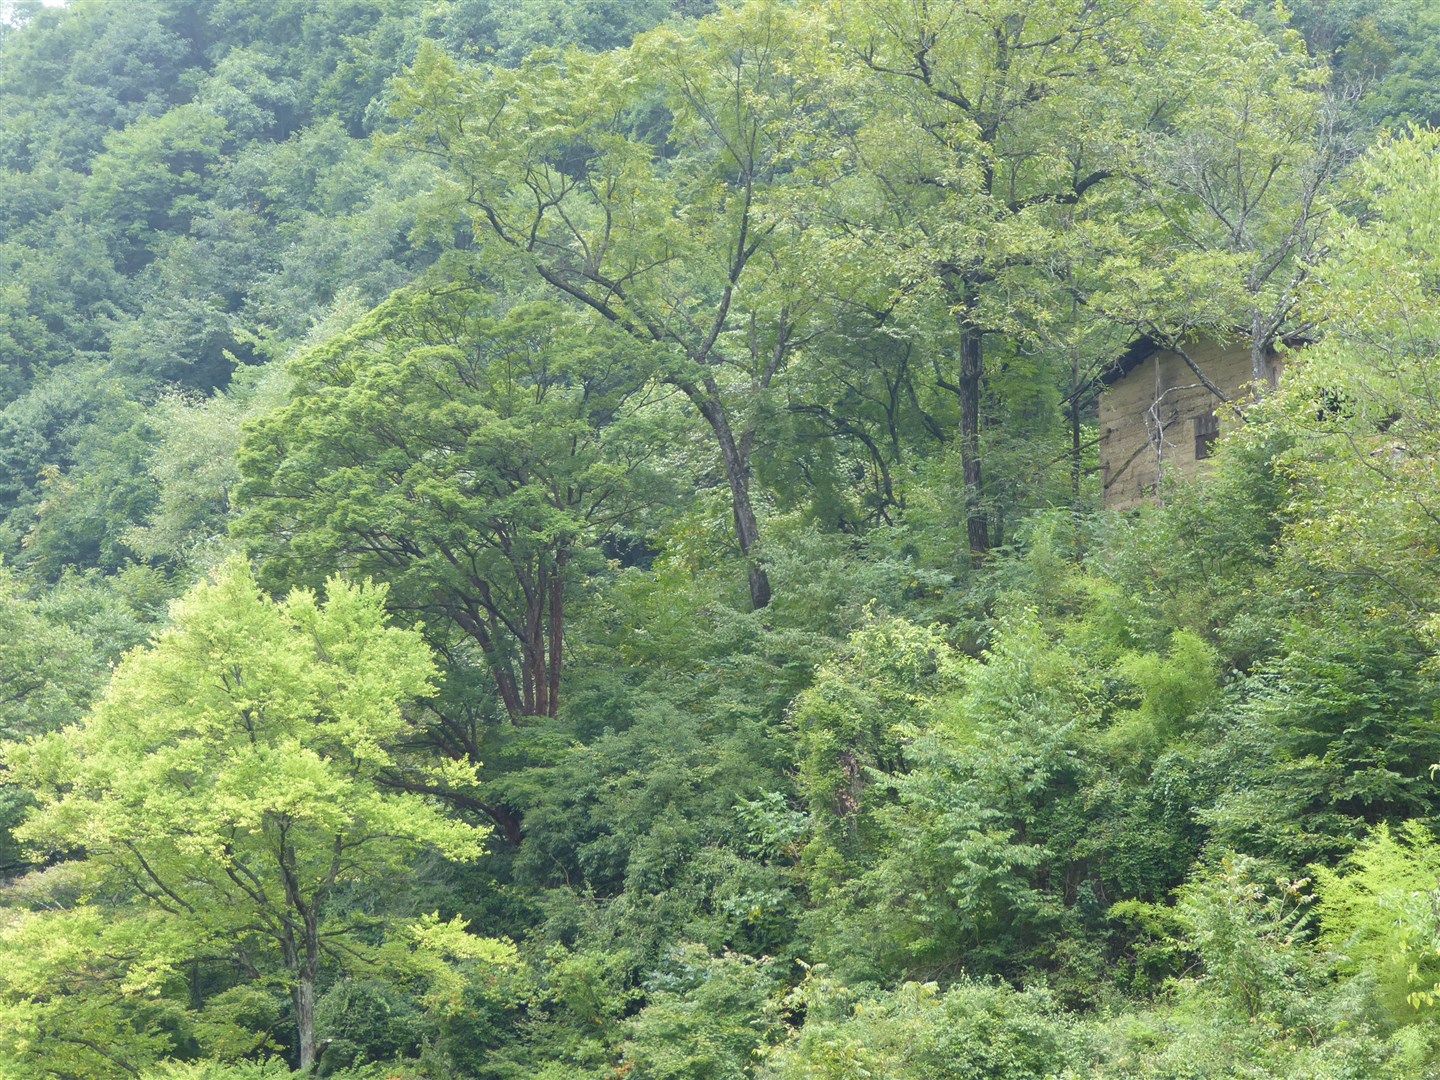 The endangered Acer griseum, the paperbark maple, in the wild in China (Anthony S. Aiello)